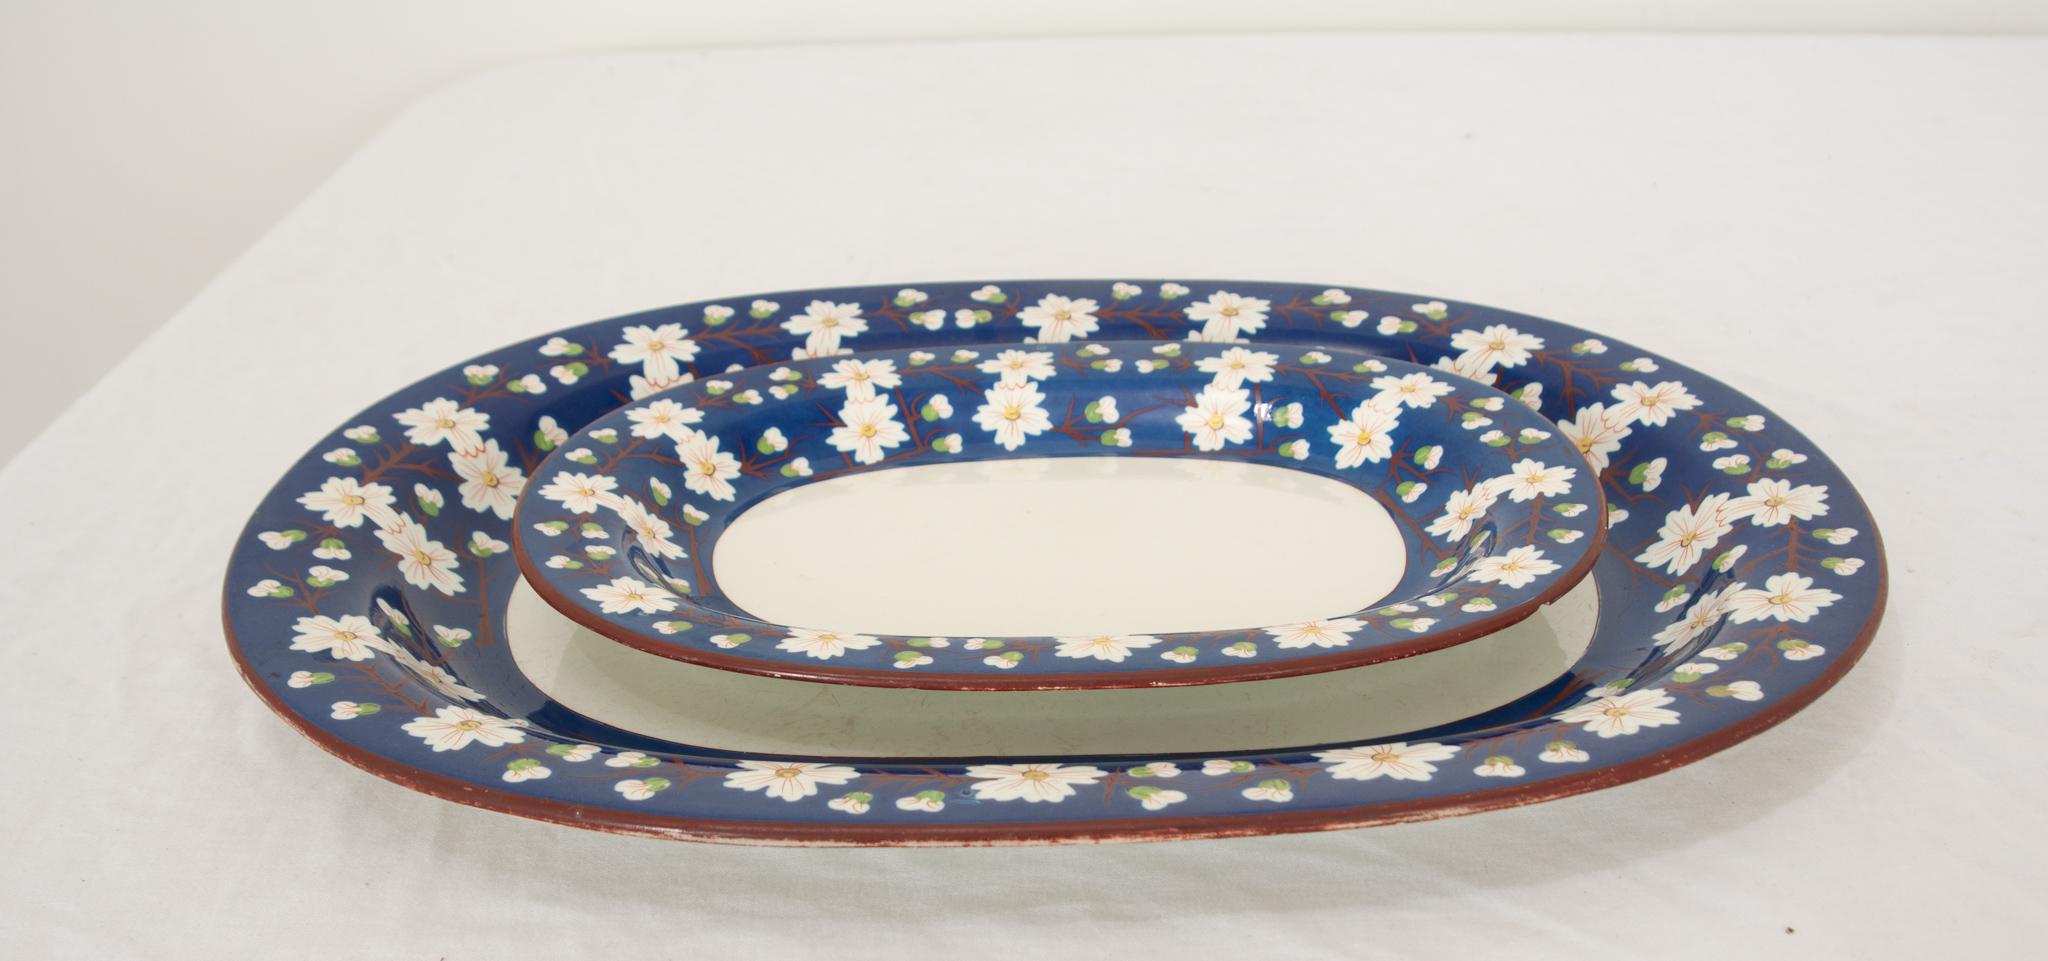 Fired Pair of 19th Century Wedgwood Pearlware Platters For Sale